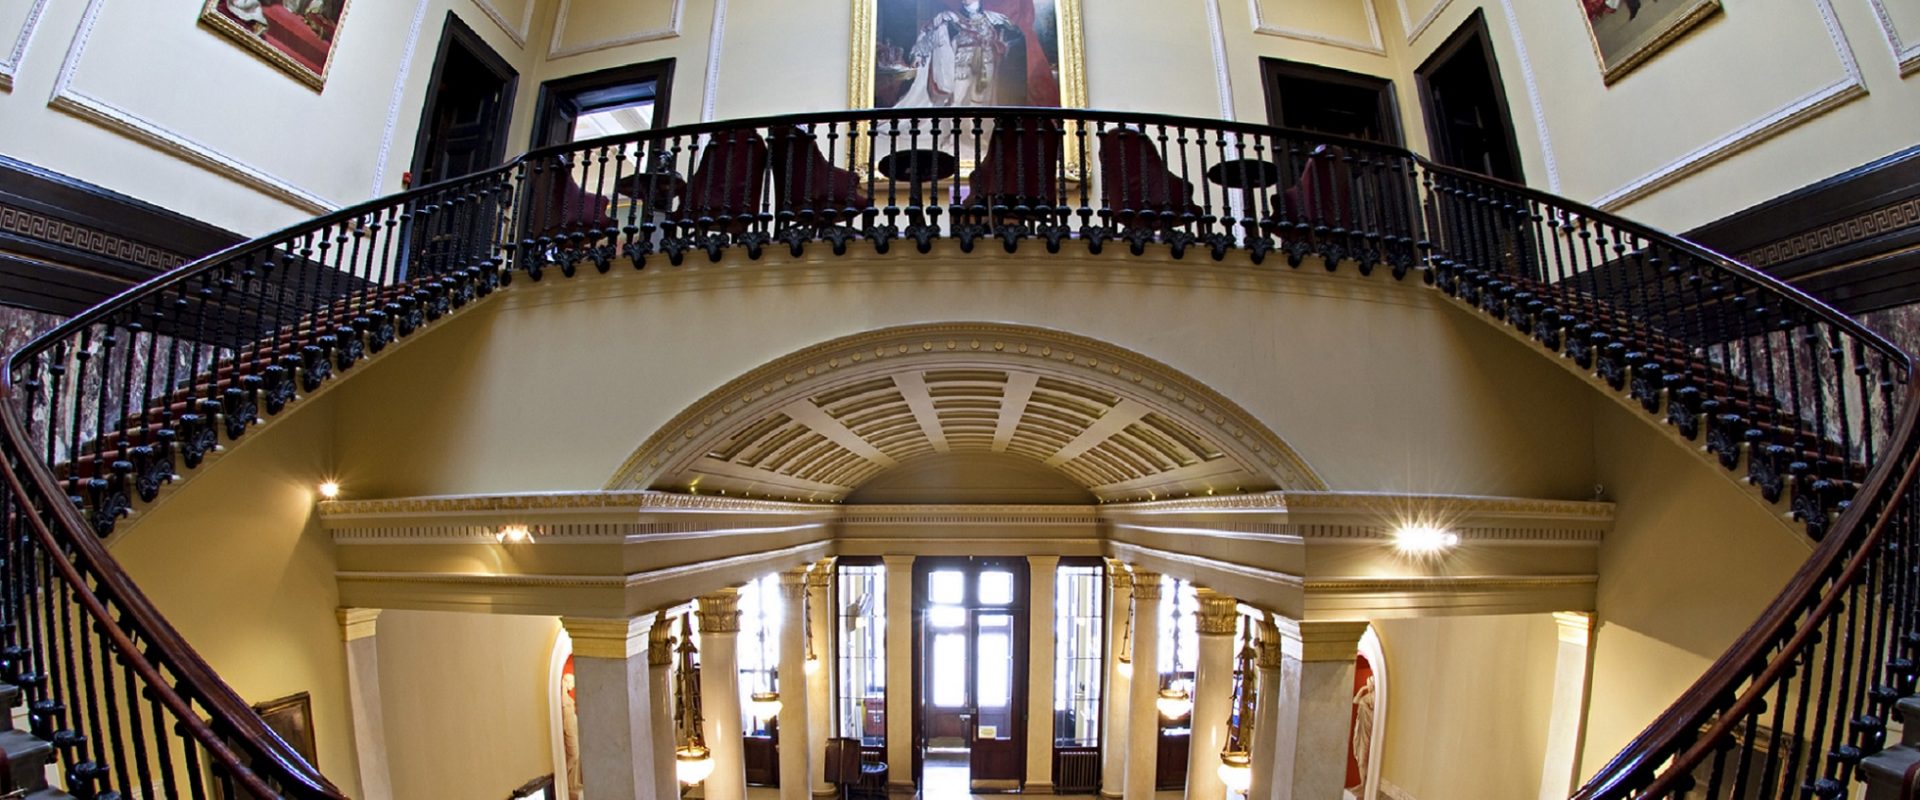 View from stairs of entrance hall to Club building